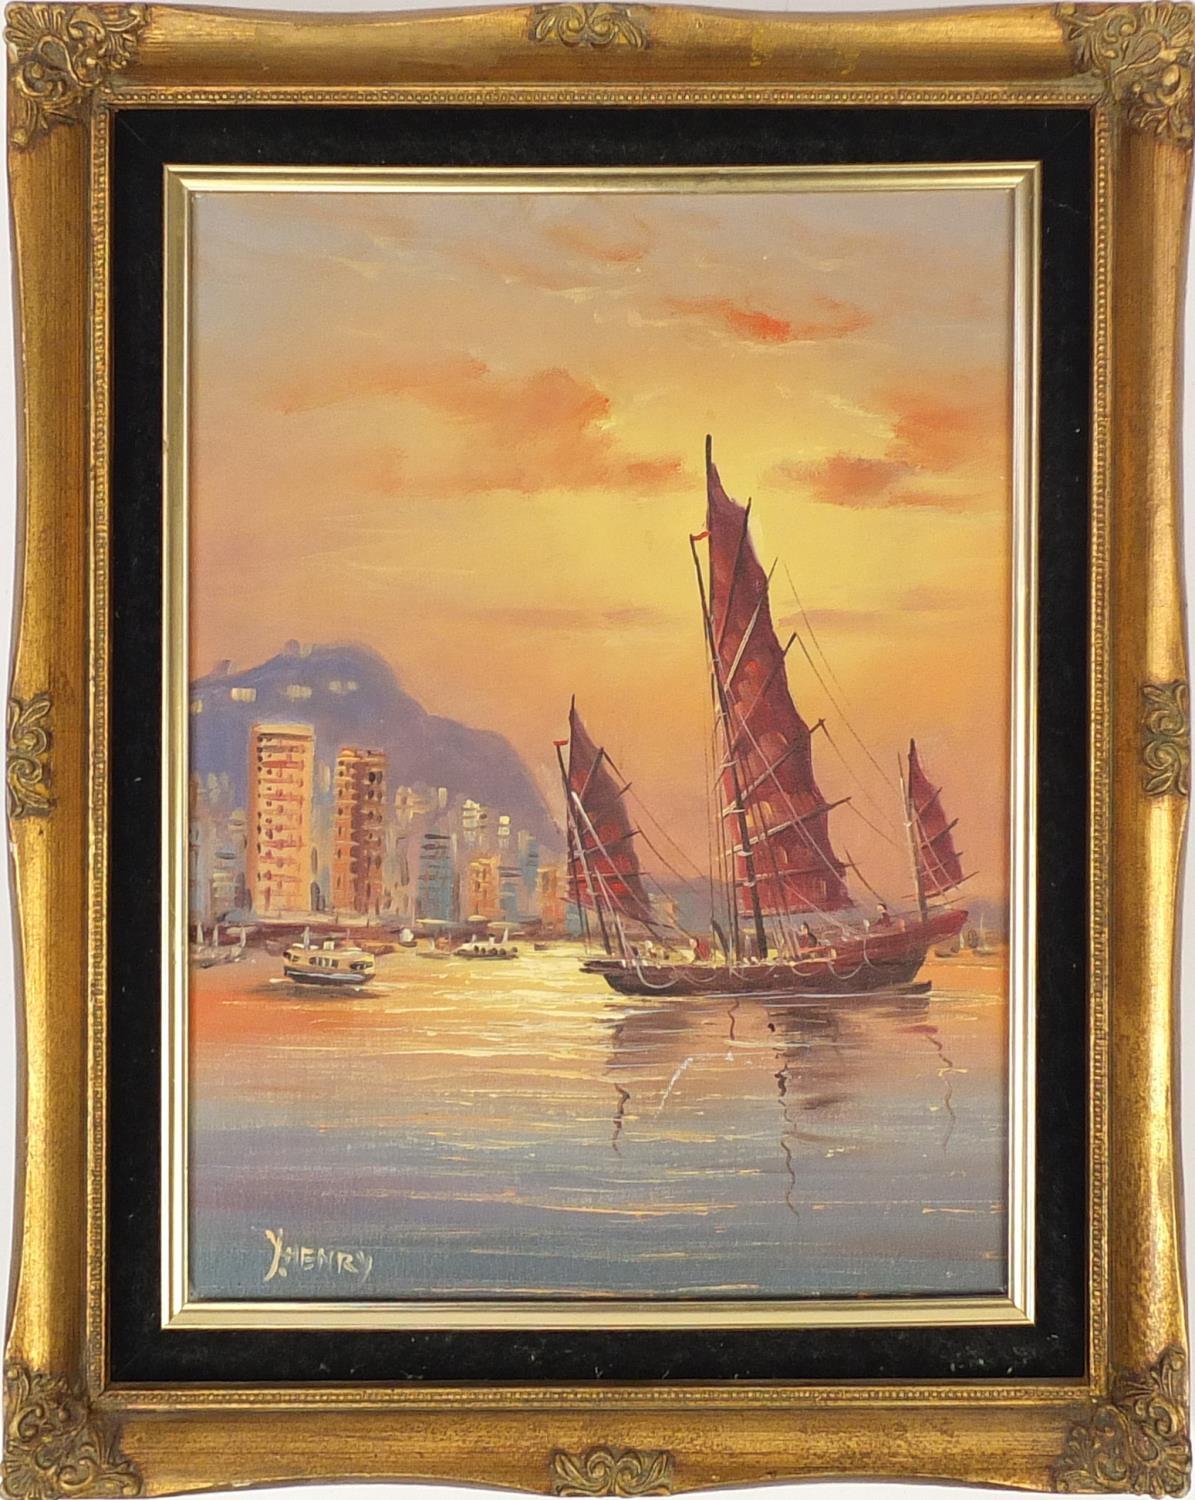 Y Henry - Chinese fishing boats, oil on canvas, framed, 40cm x 30cm : For Further Condition - Image 2 of 4